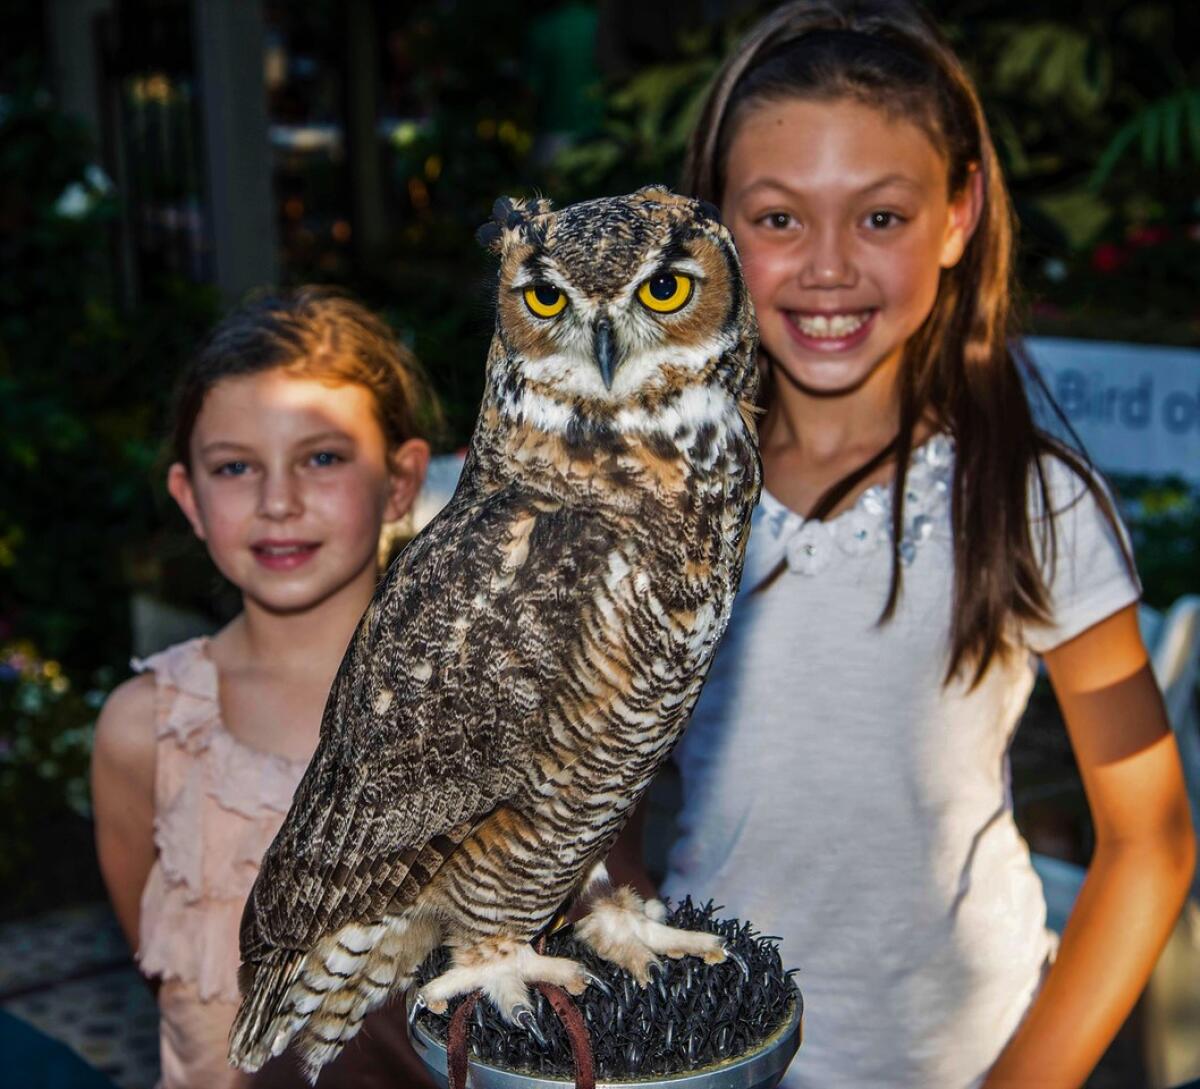 Sherman Gardens gives visitors a look at nocturnal animals during "Creatures of the Night" Feb. 24 and 25, from 5 to 7 p.m.